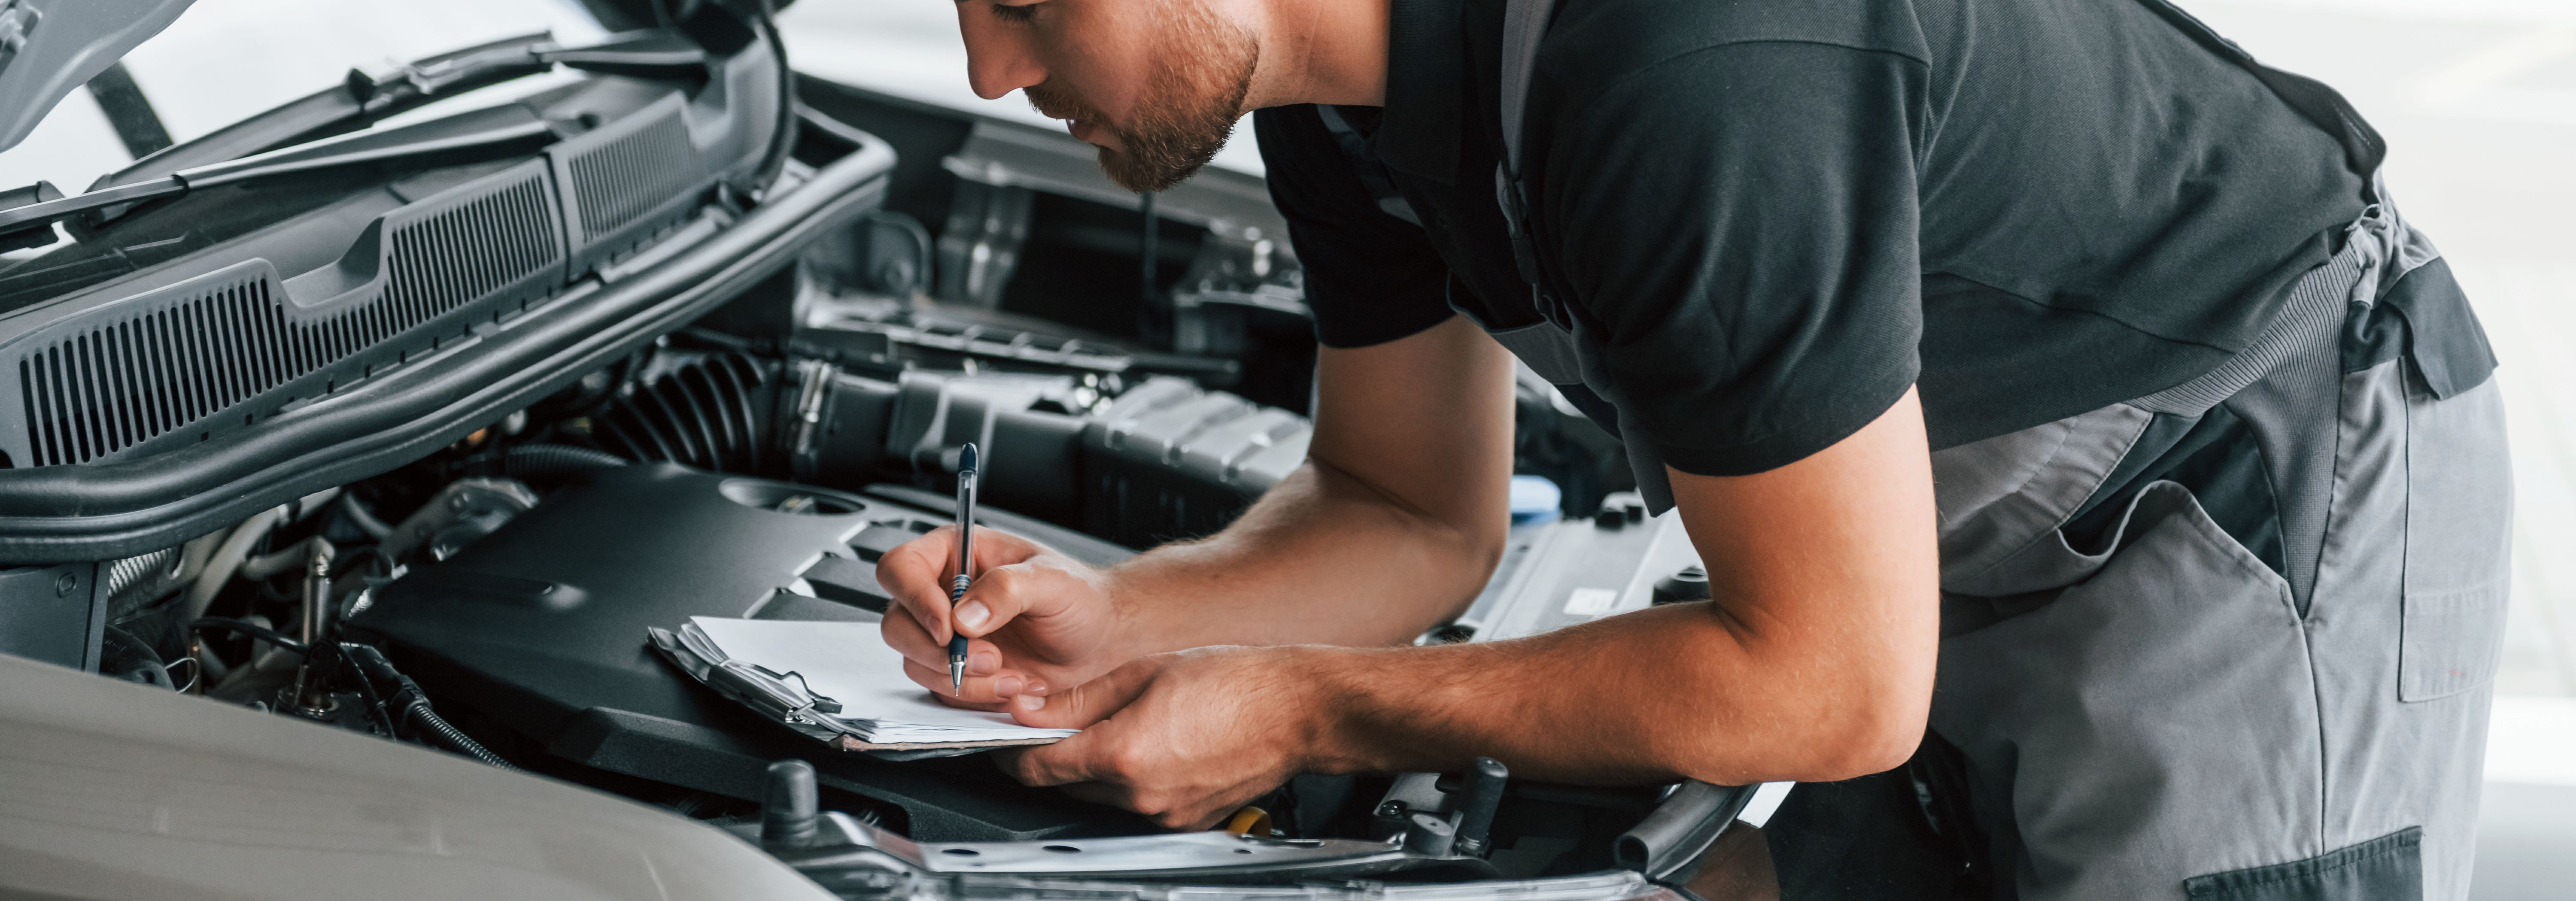 At ENITREK OÜ, we believe that every journey should be seamless and worry-free. That's why we've dedicated ourselves to providing exceptional auto care services